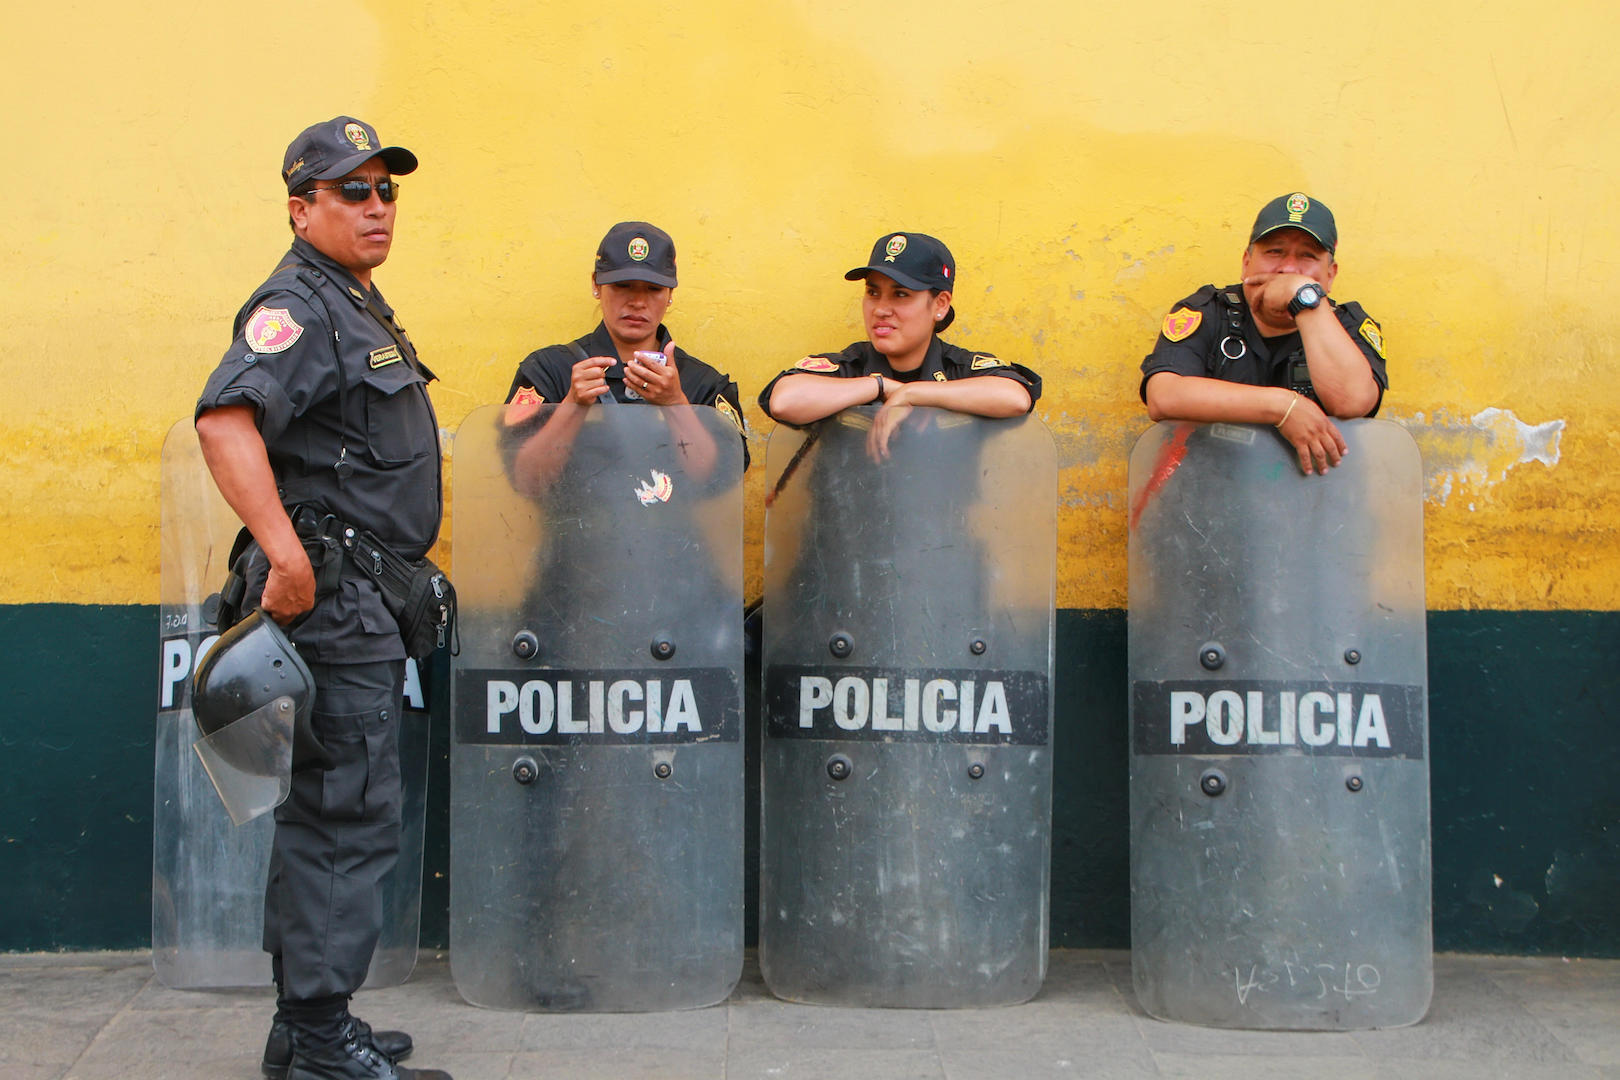 police in Peru with their shields